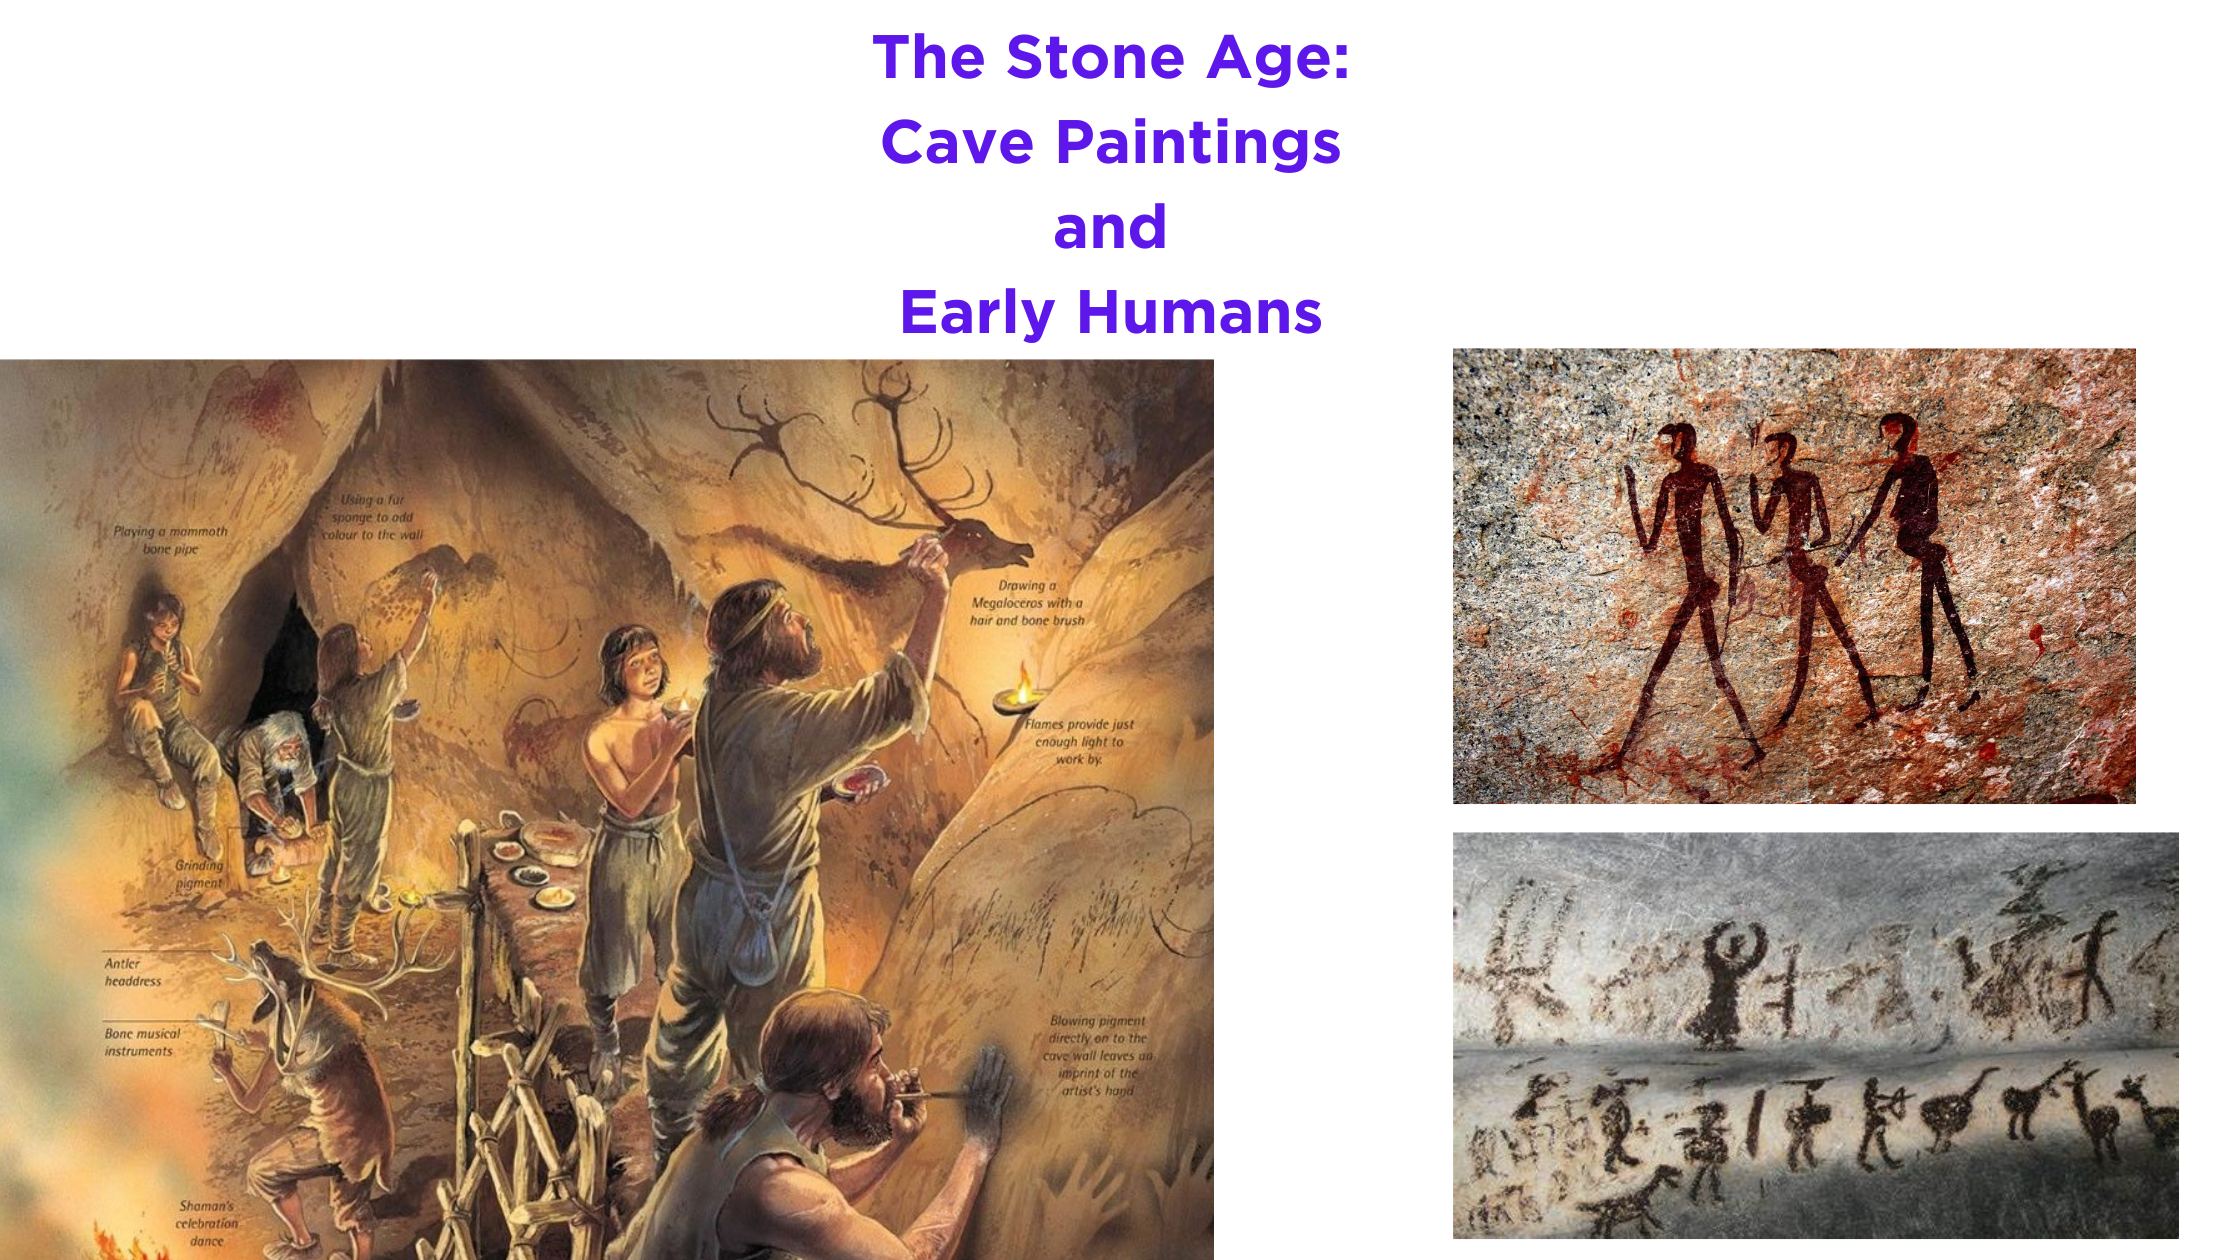 The Stone Age: Cave Paintings and Early Humans